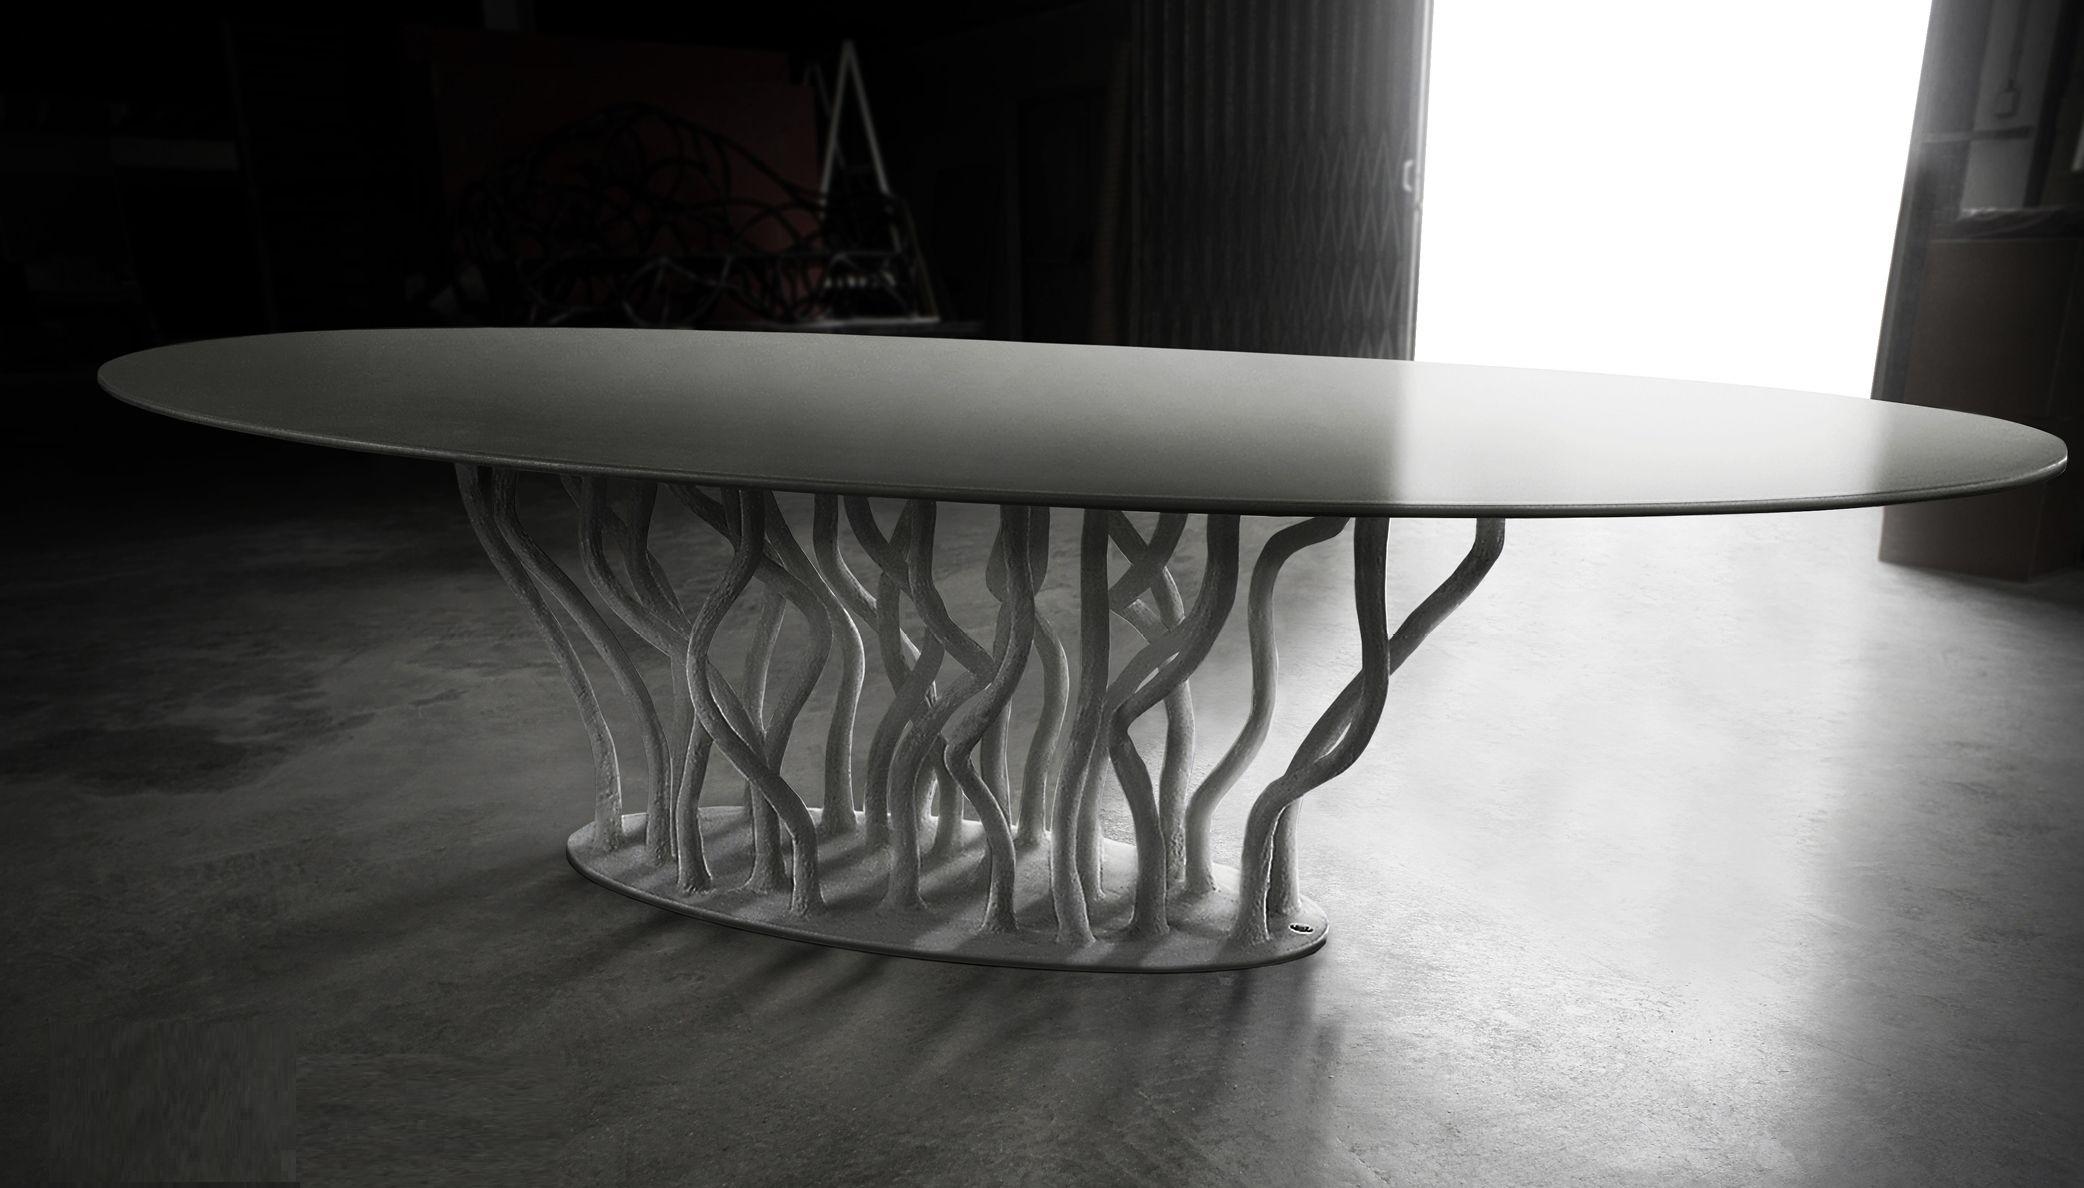 Handcrafted of resin reinforced with fiberglass and lacquered in white with matte finish.
The artist is inspired by branches that seem to protrude from the floor. The organic structure consists of reinforced acrylic resin. All branches and the